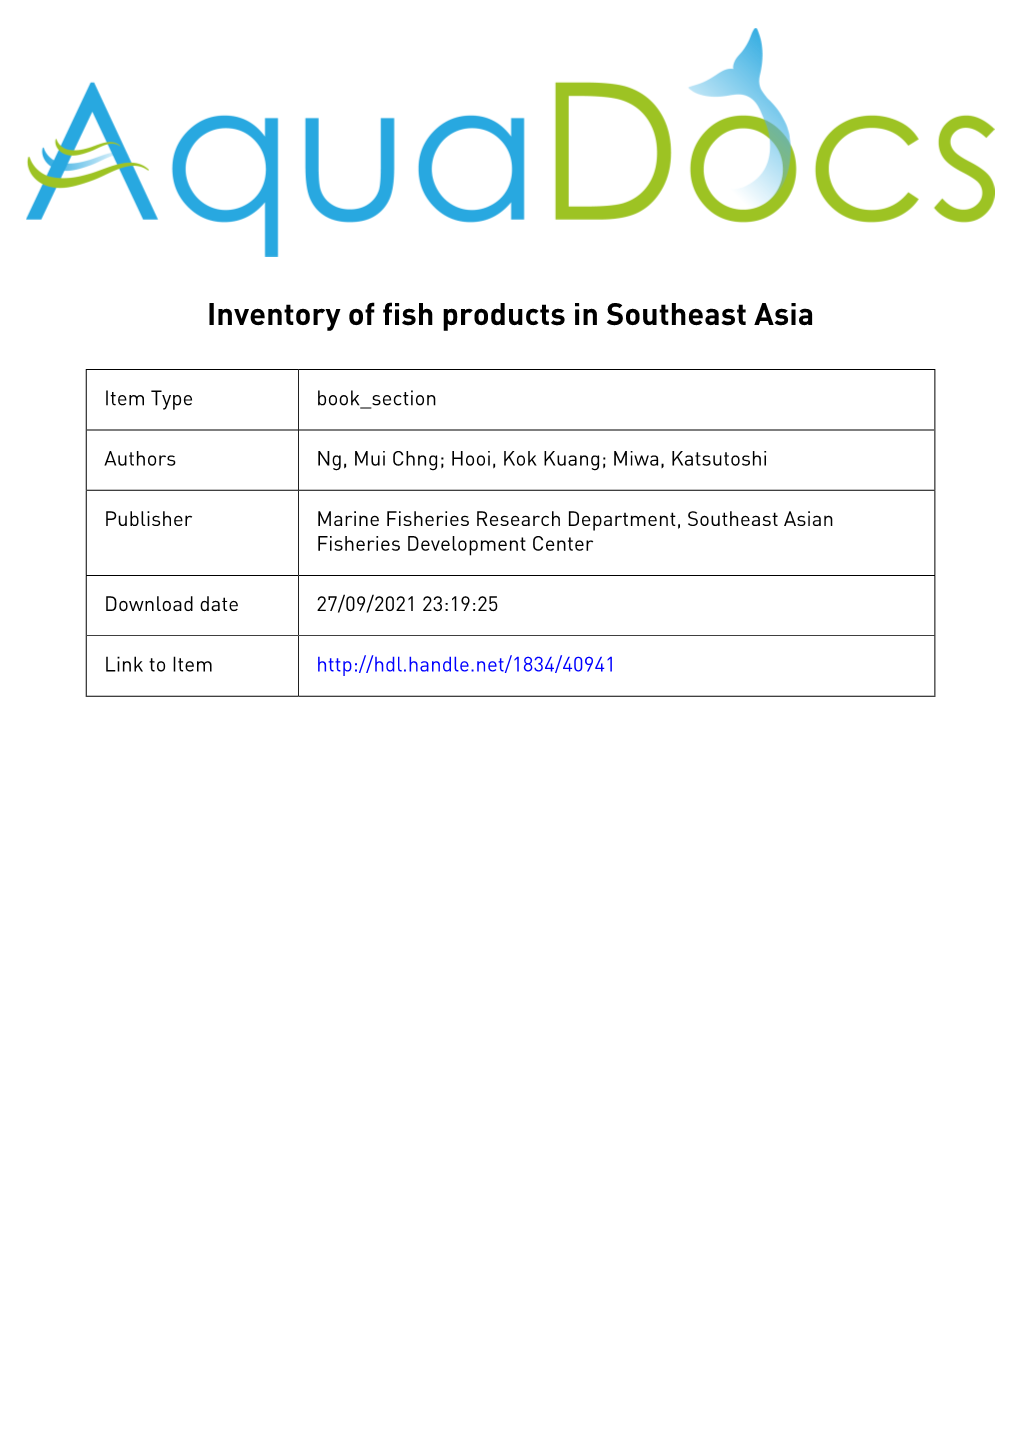 Inventory of Fish Products in Southeast Asia